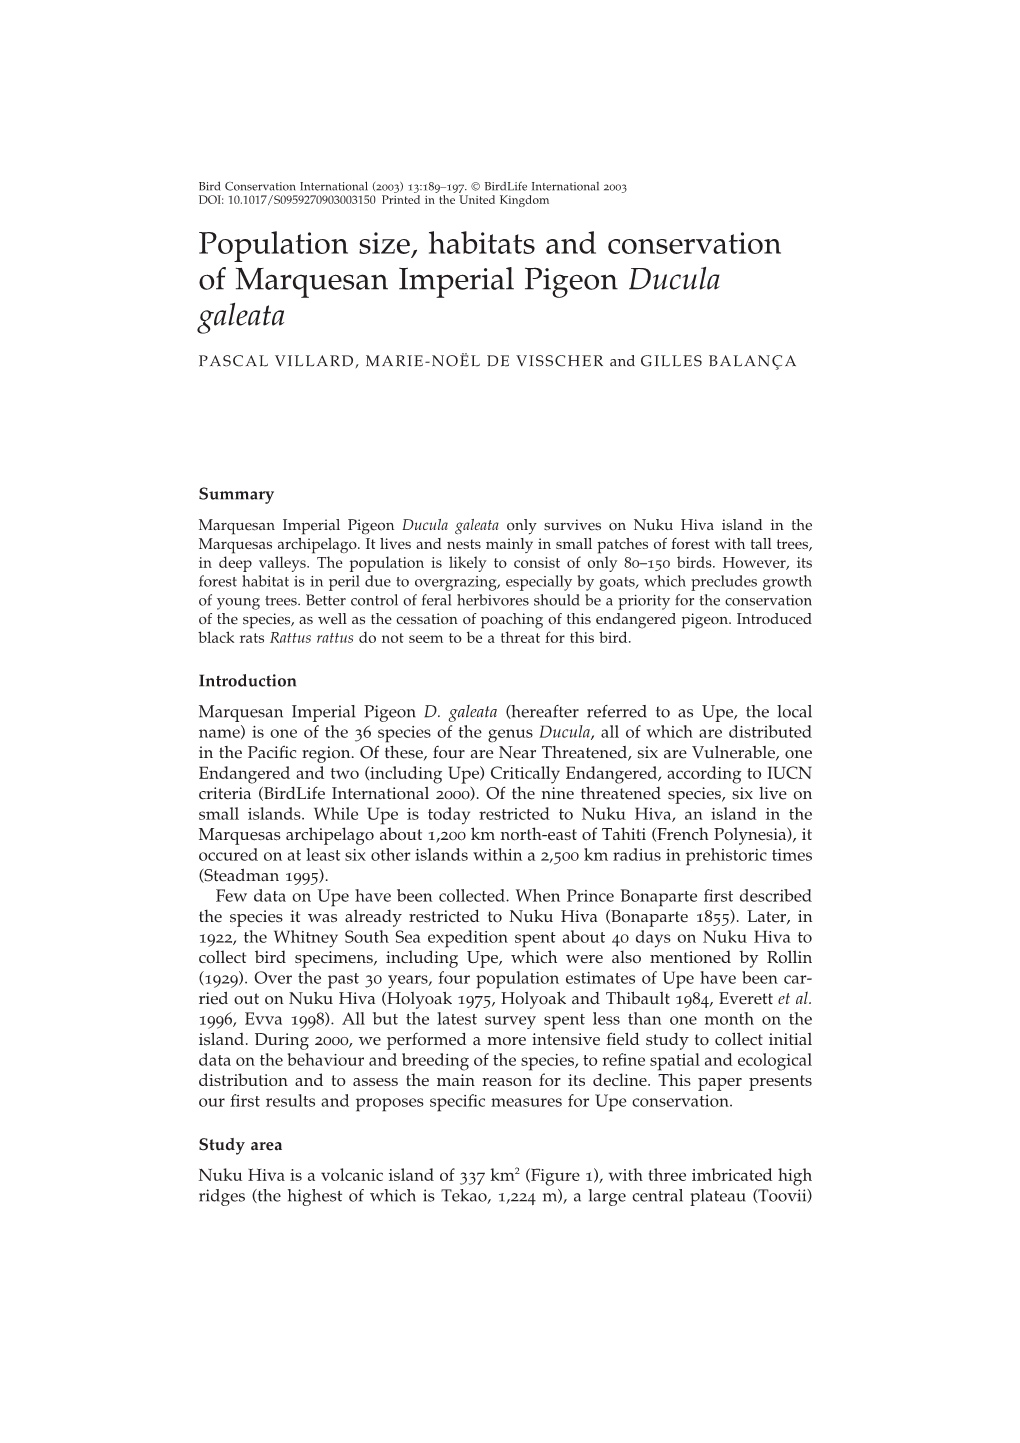 Population Size, Habitats and Conservation of Marquesan Imperial Pigeon Ducula Galeata